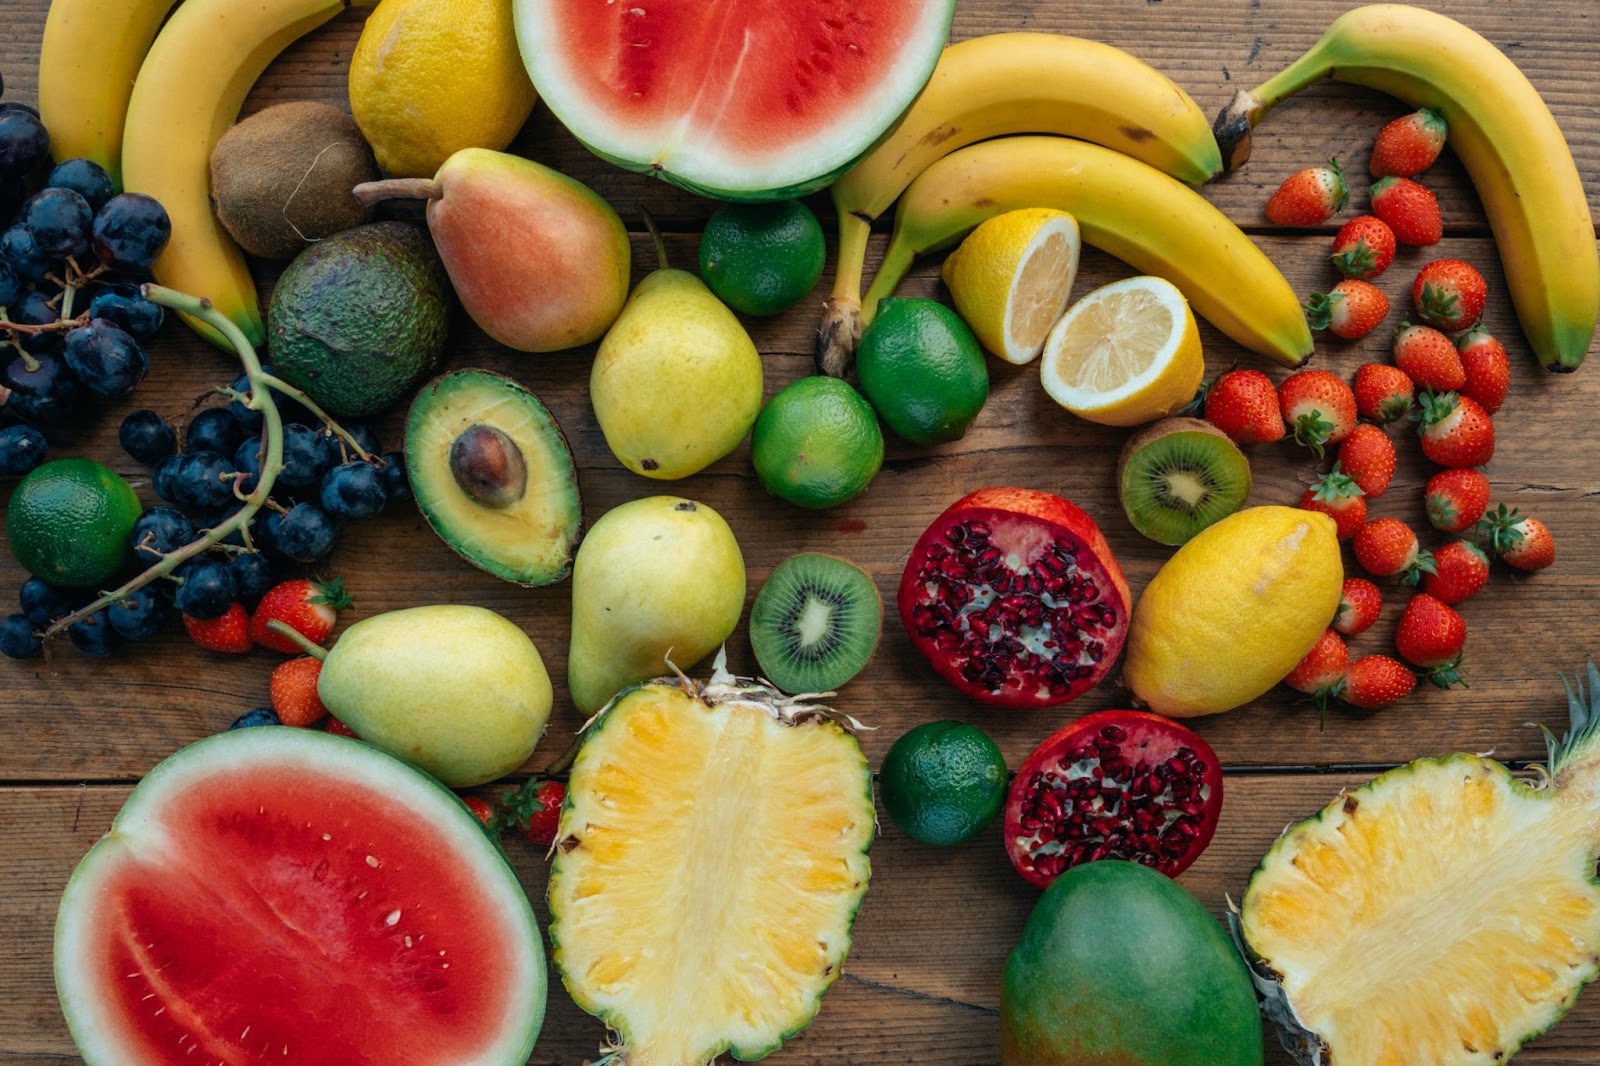 Fresh fruits and vegetables: Rich in vitamins, minerals, and dietary fiber